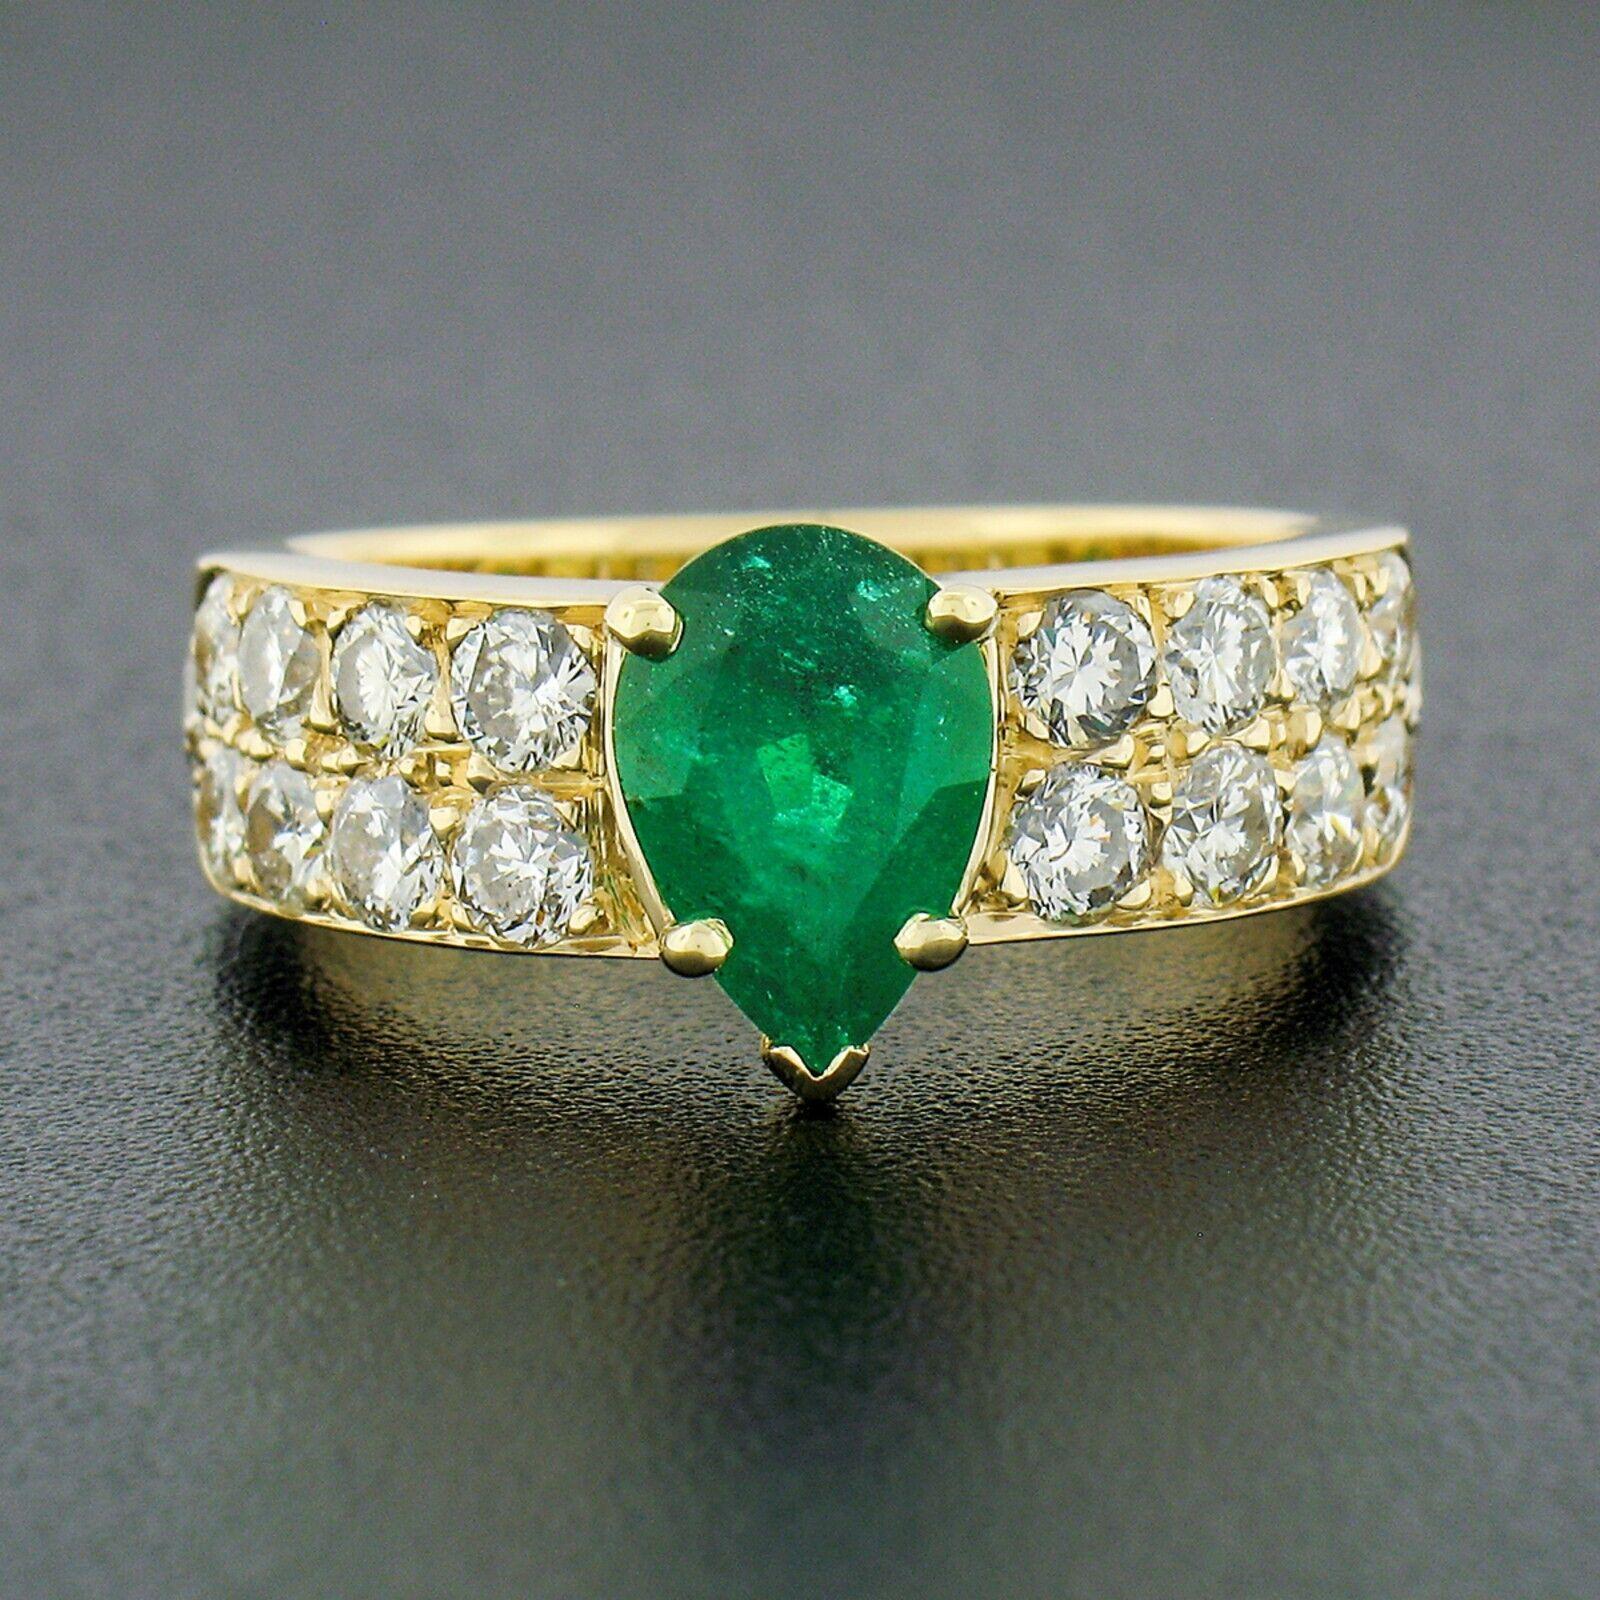 This stunning ring was crafted from solid 18k yellow gold and features a gorgeous pear cut emerald solitaire neatly prong set at its center. This stone stands out with its attractive size and deep, vibrant, green color that gives this ring such an